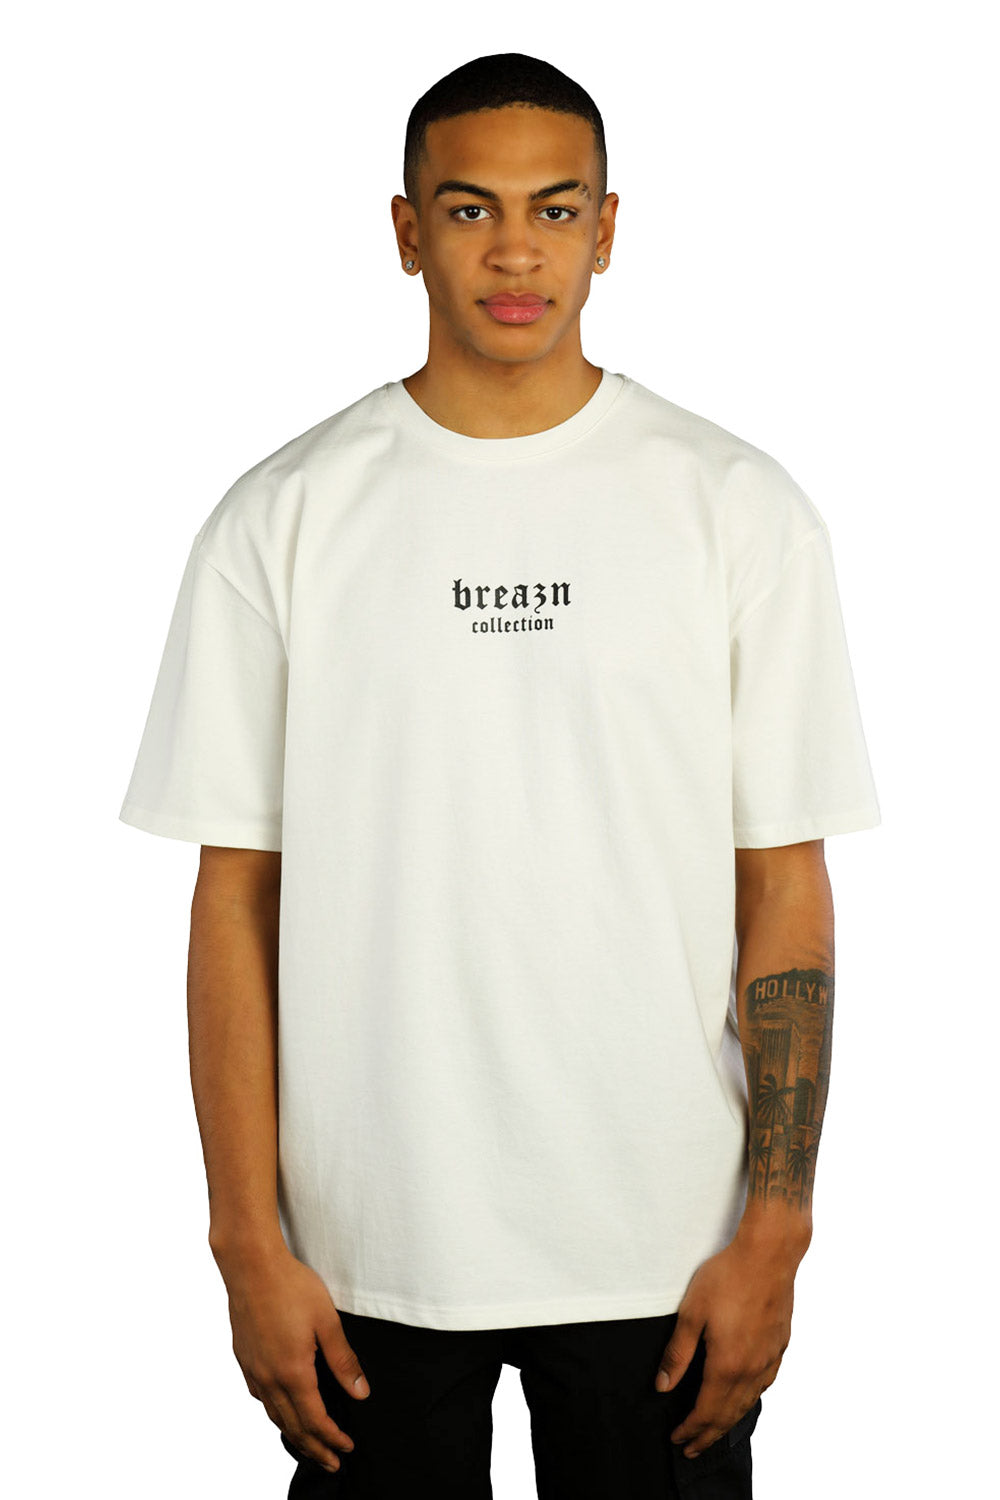 Collection T-Shirt Front (white) Breazn – Print